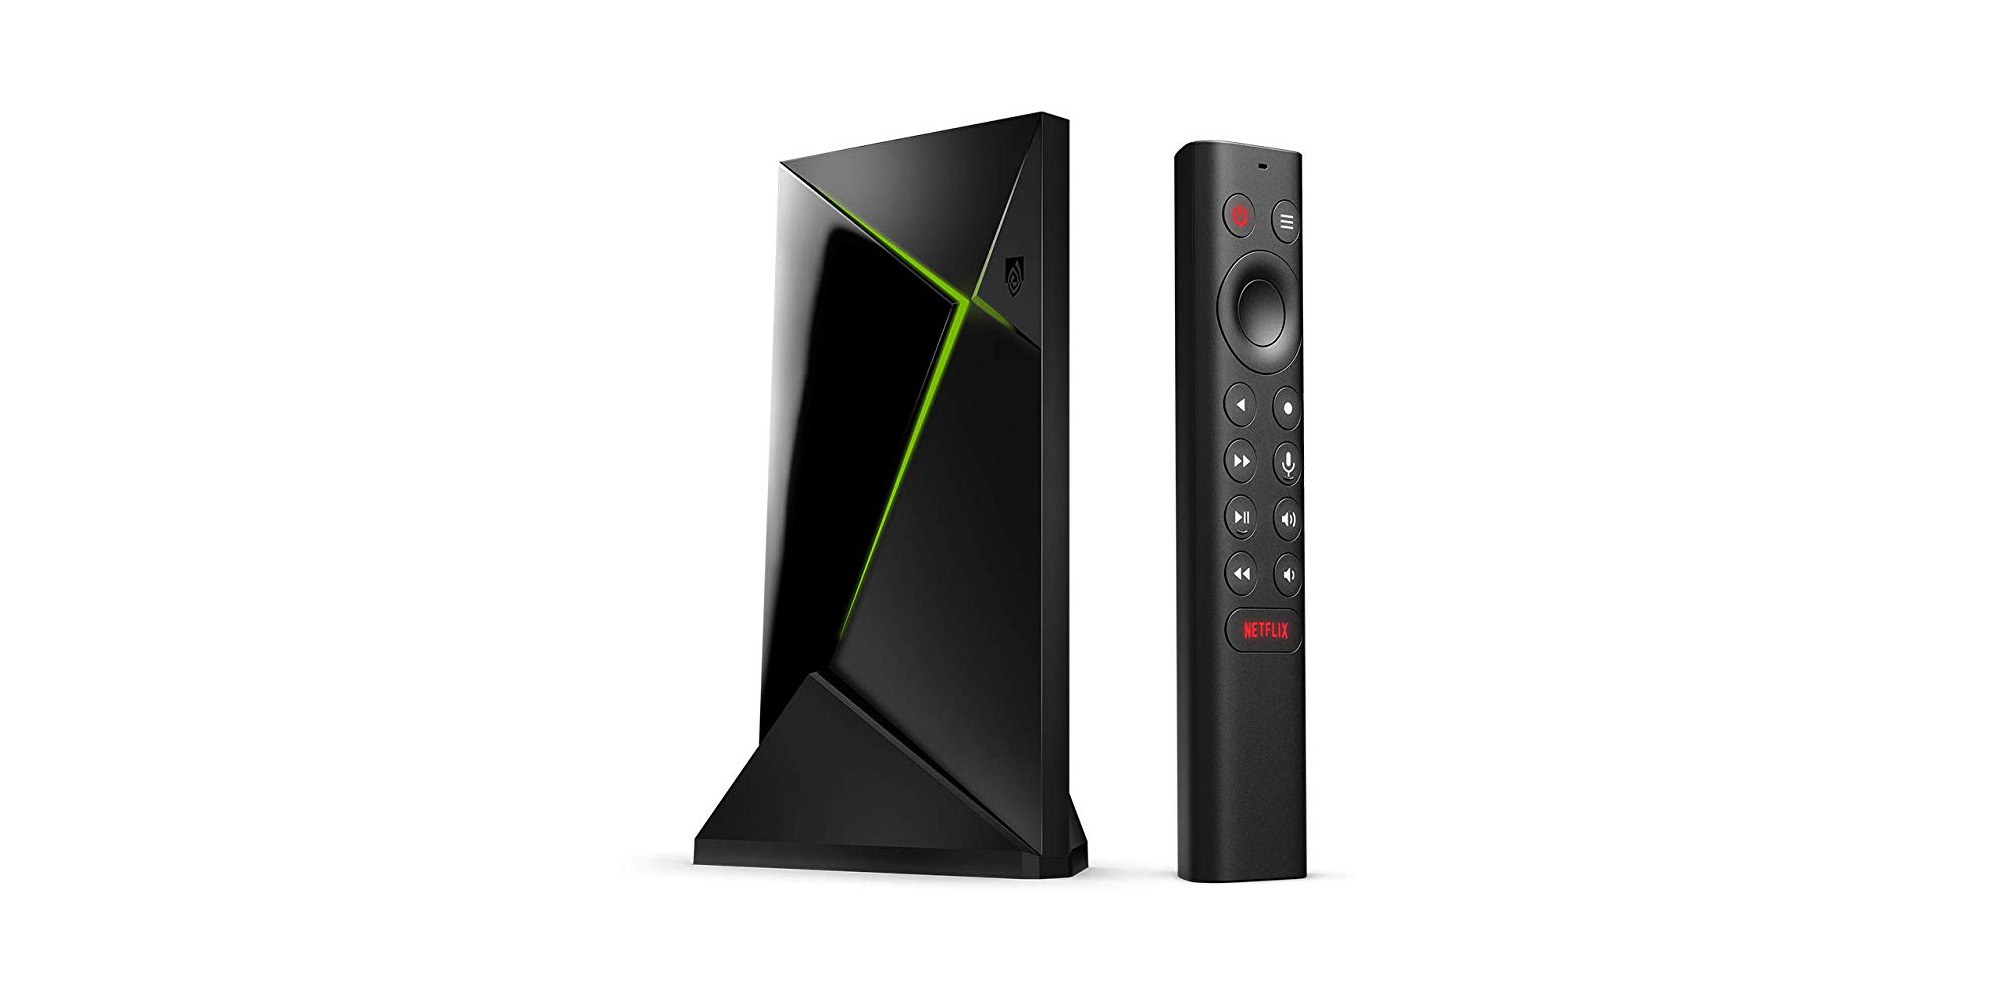 Hospitality Oh assistant Nvidia Shield TV 'Pro' appears early on Amazon for $199 - 9to5Google